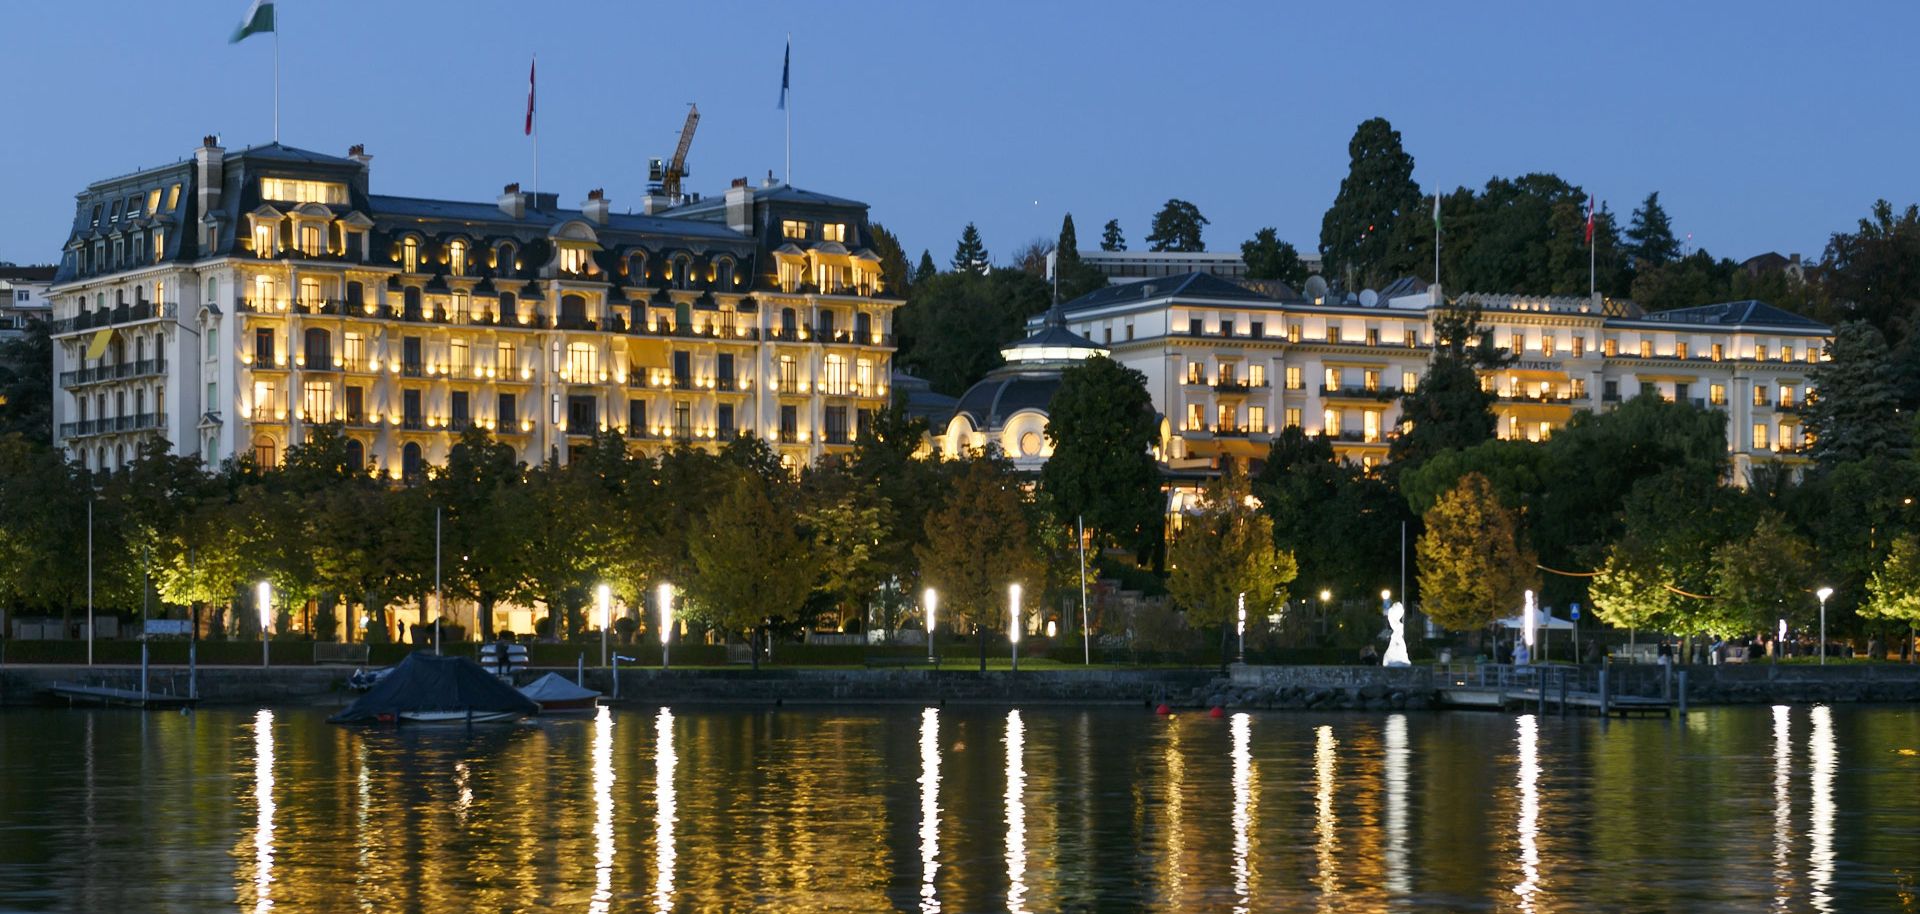 The Beau-Rivage Palace hotel in Lausanne, Switzerland. The politically neutral space hotels provide can make them ideal spaces for leaders to convene for consultation in times of crisis.